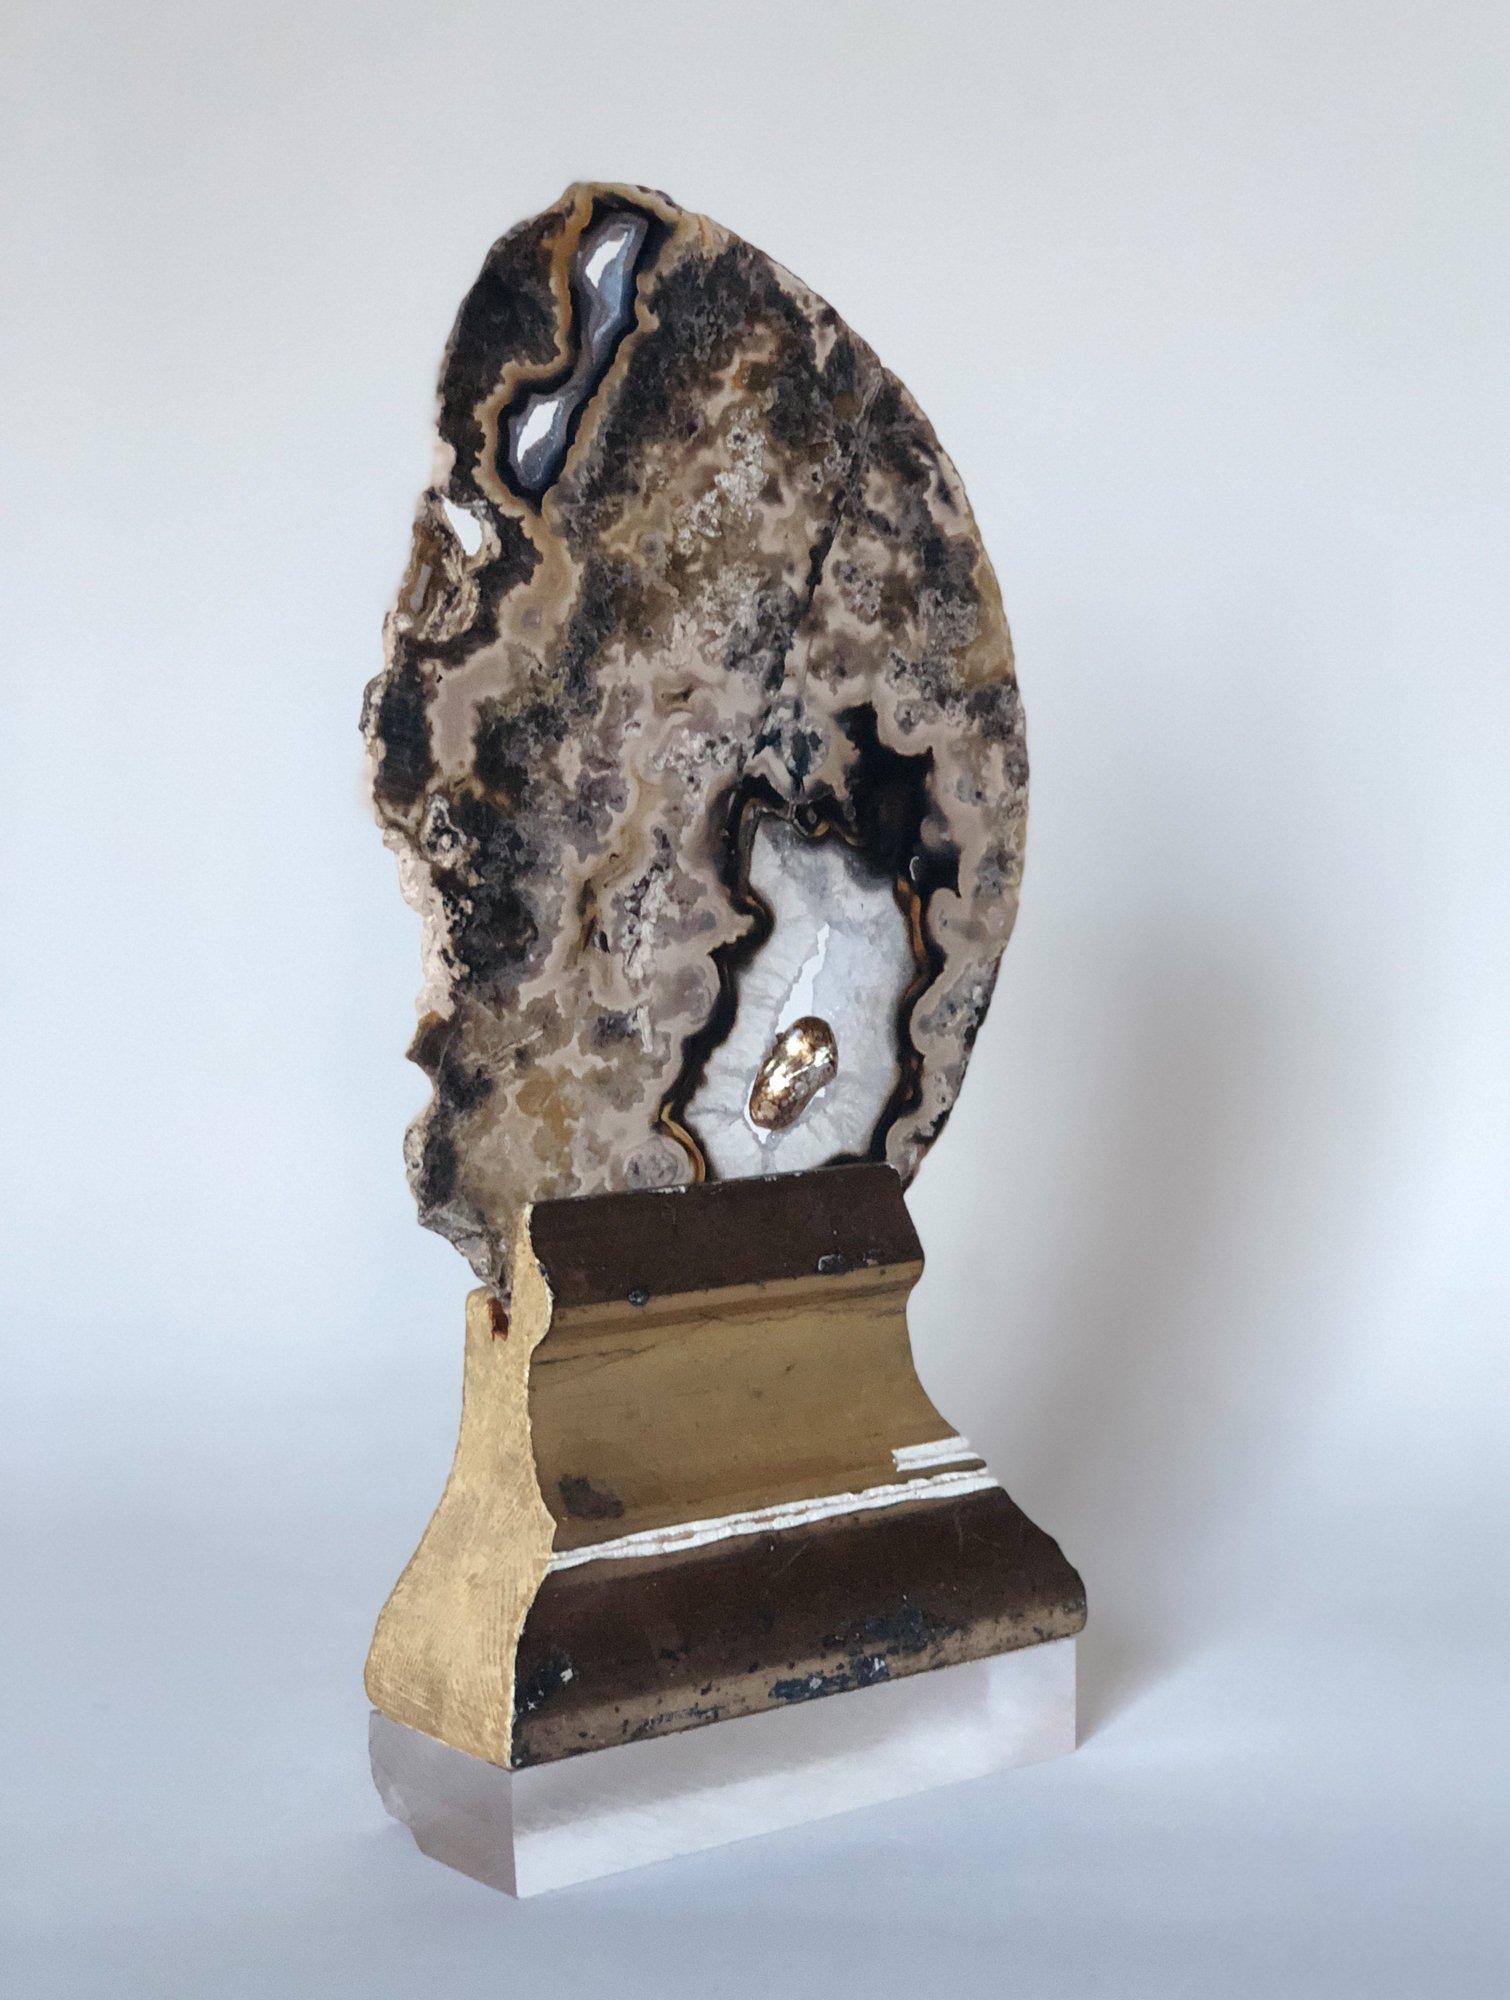 Aesthetic Movement 18th Century Italian Wood Molding Decorated with a Polished Agate Slice